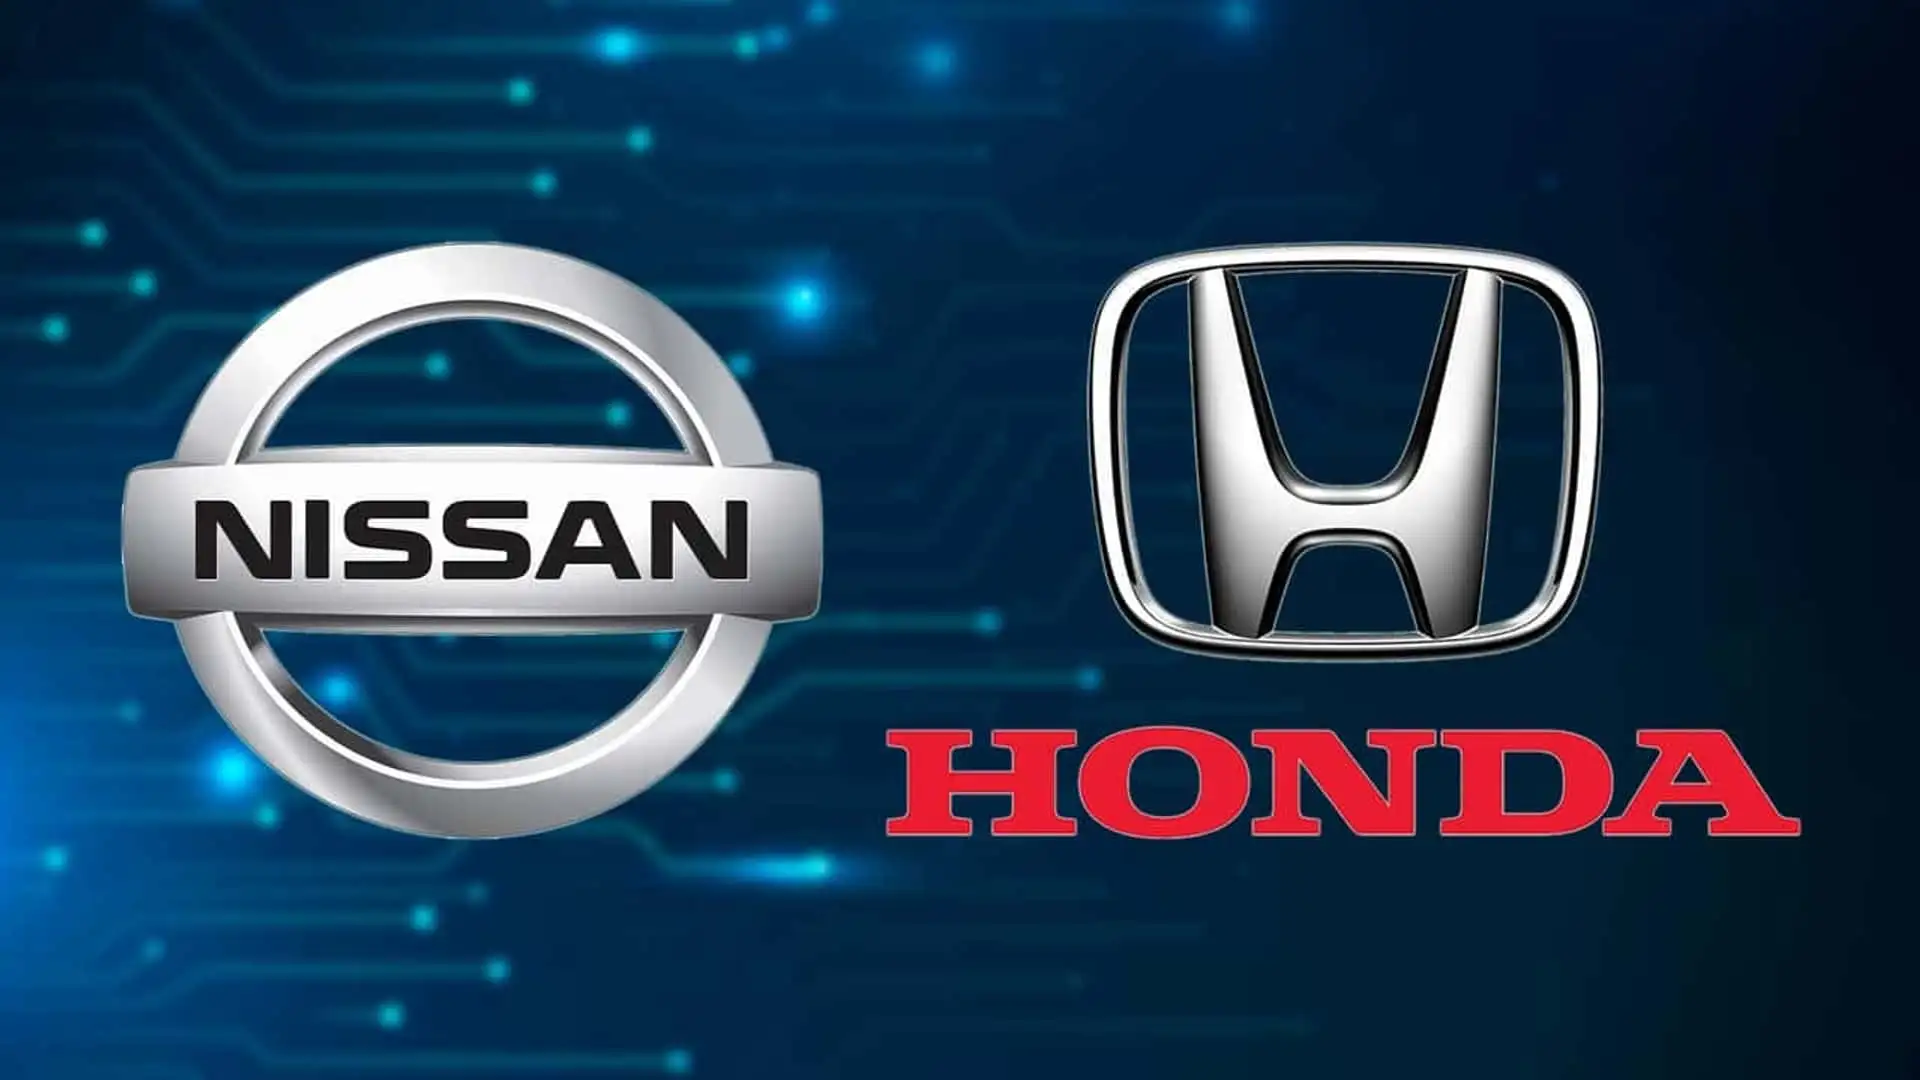 Joining Forces for a Greener Future  The Strategic Partnership of Nissan and Honda